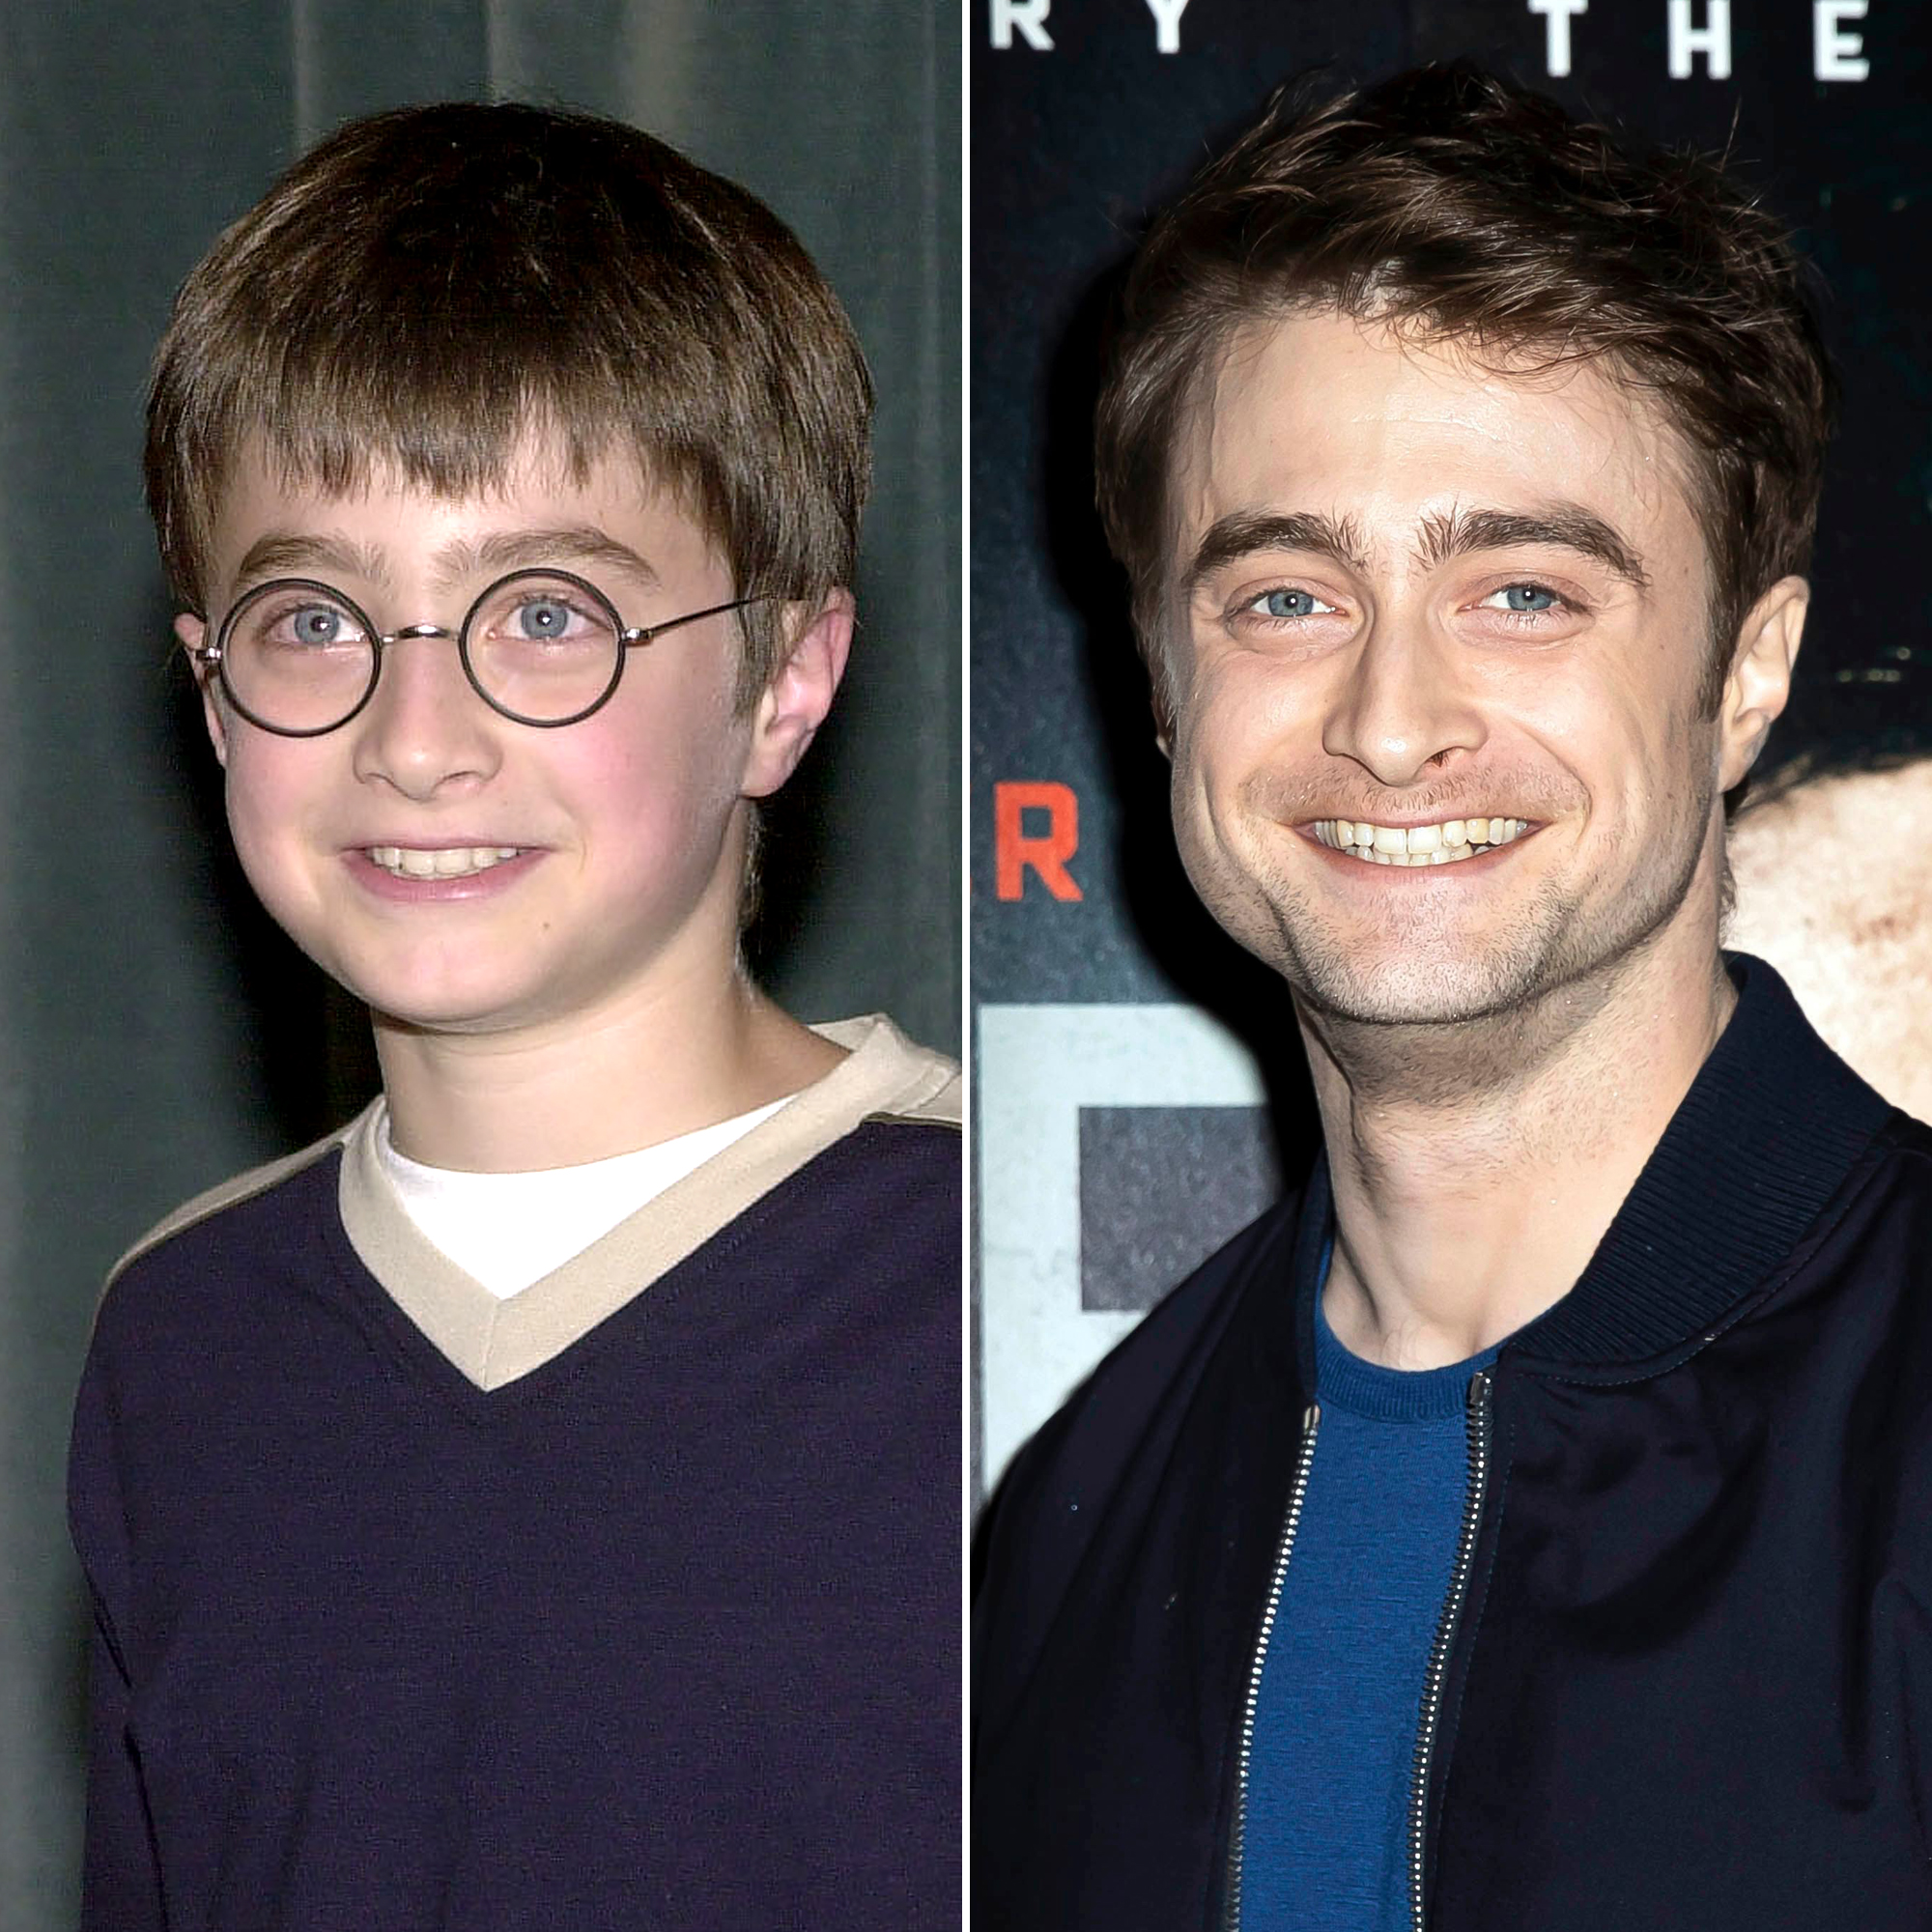 Who's Who in Potter 4  Harry Potter (Daniel Radcliffe)